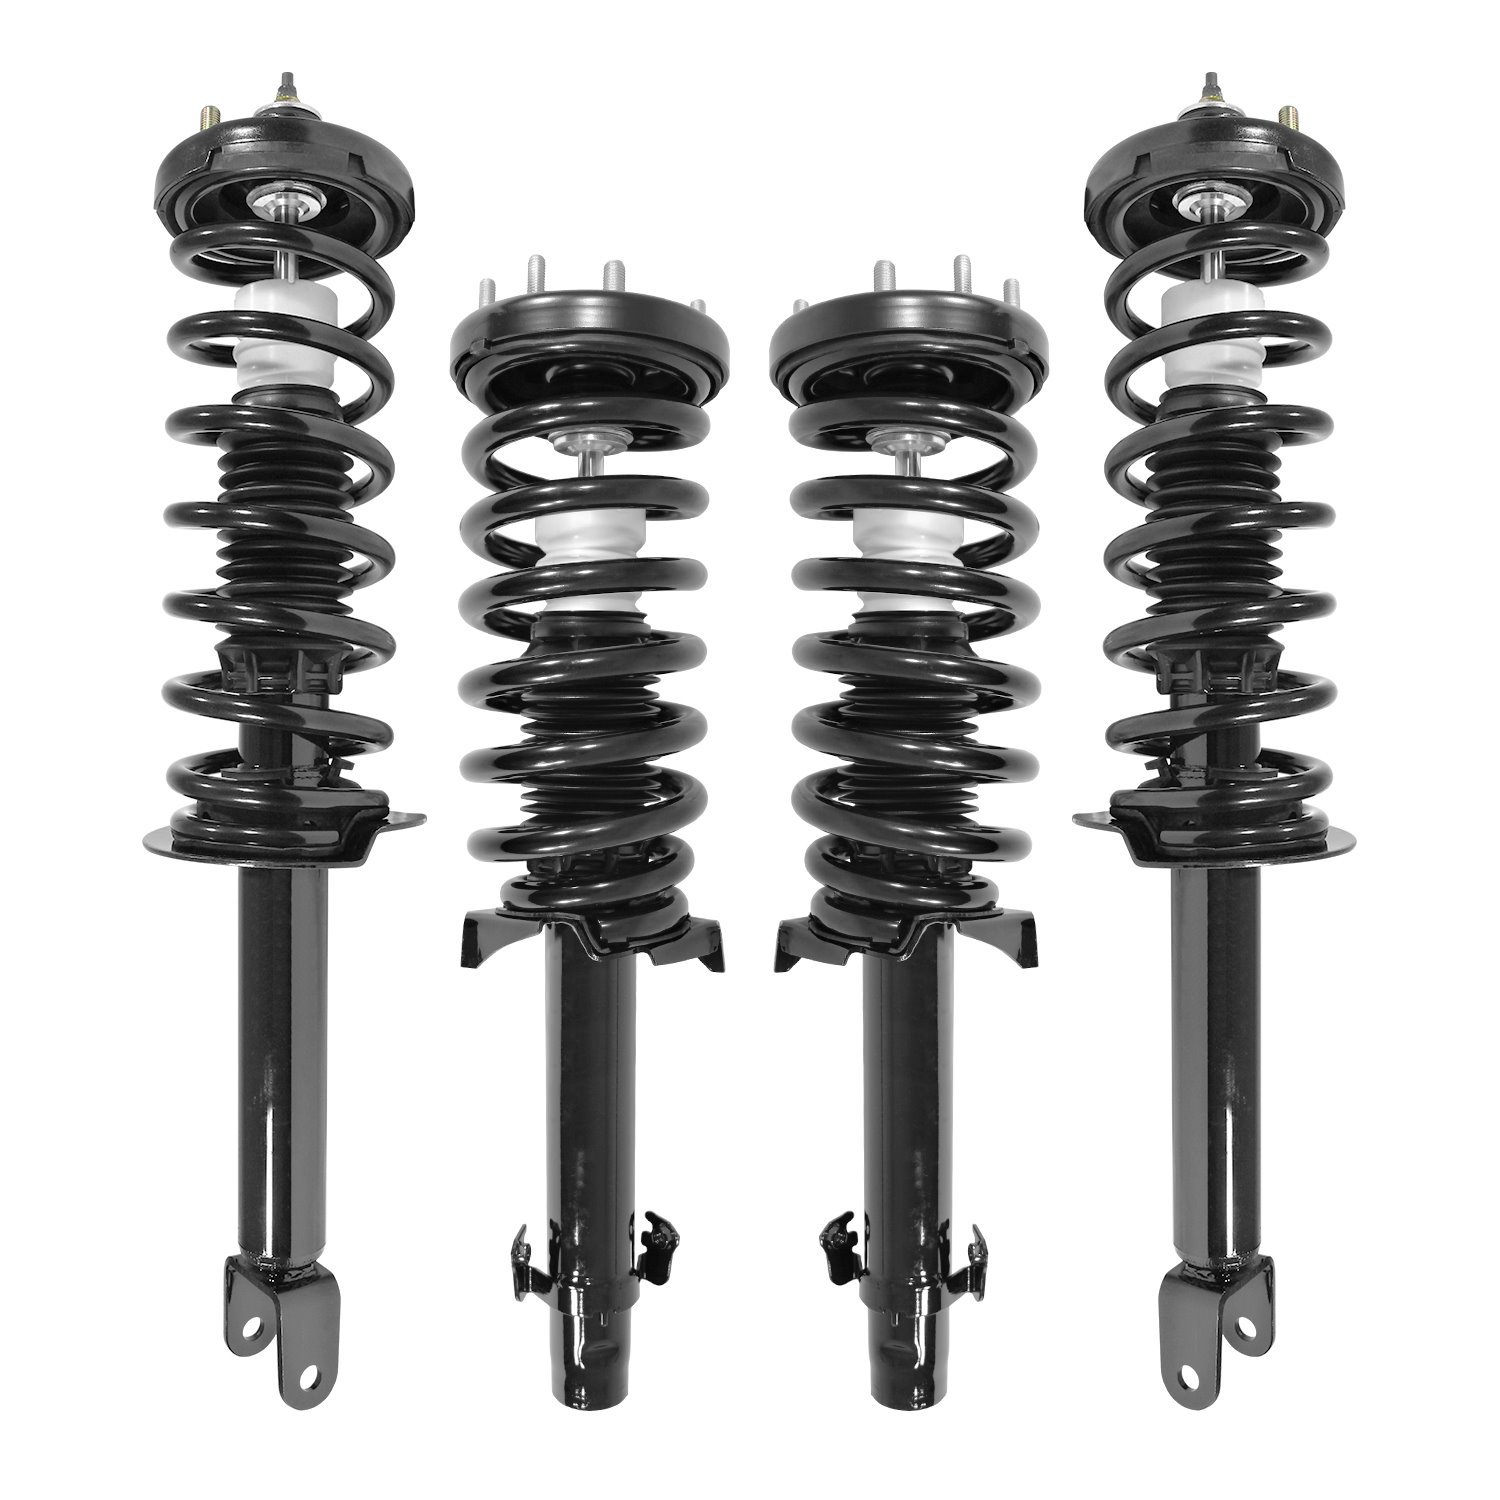 4-11235-15180-001 Front & Rear Suspension Strut & Coil Spring Assembly Kit Fits Select Honda Accord